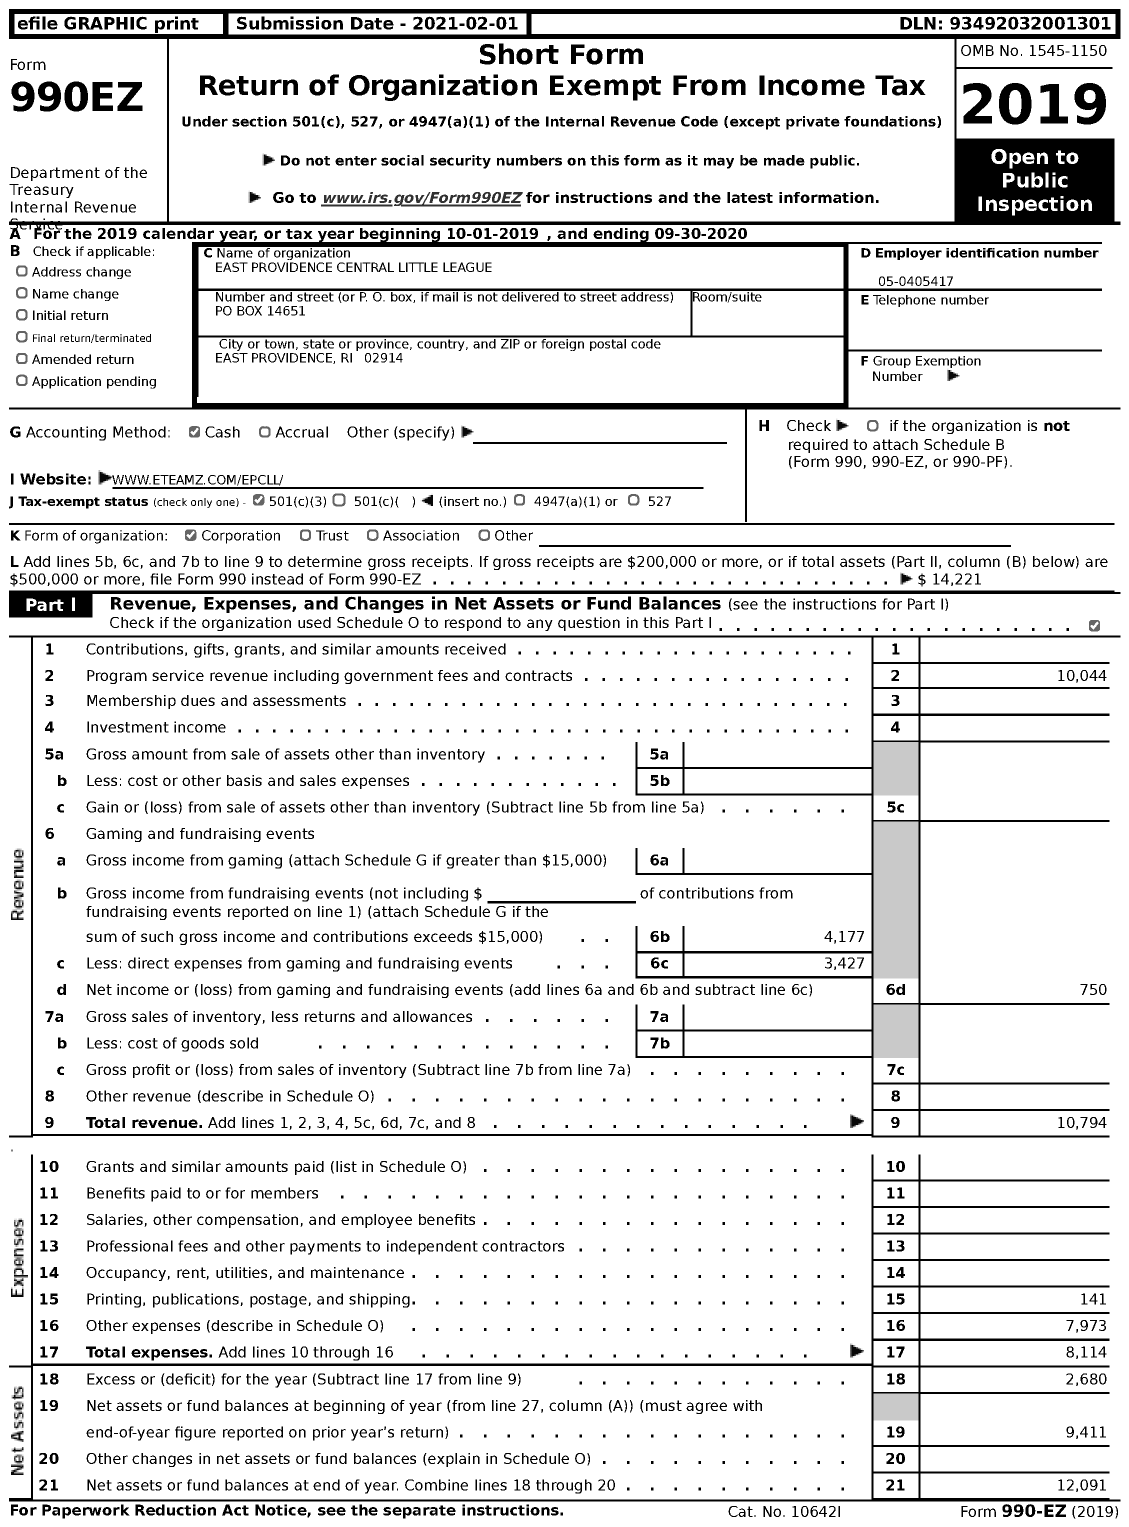 Image of first page of 2019 Form 990EZ for Little League Baseball - 2390203 East Providence Central LL